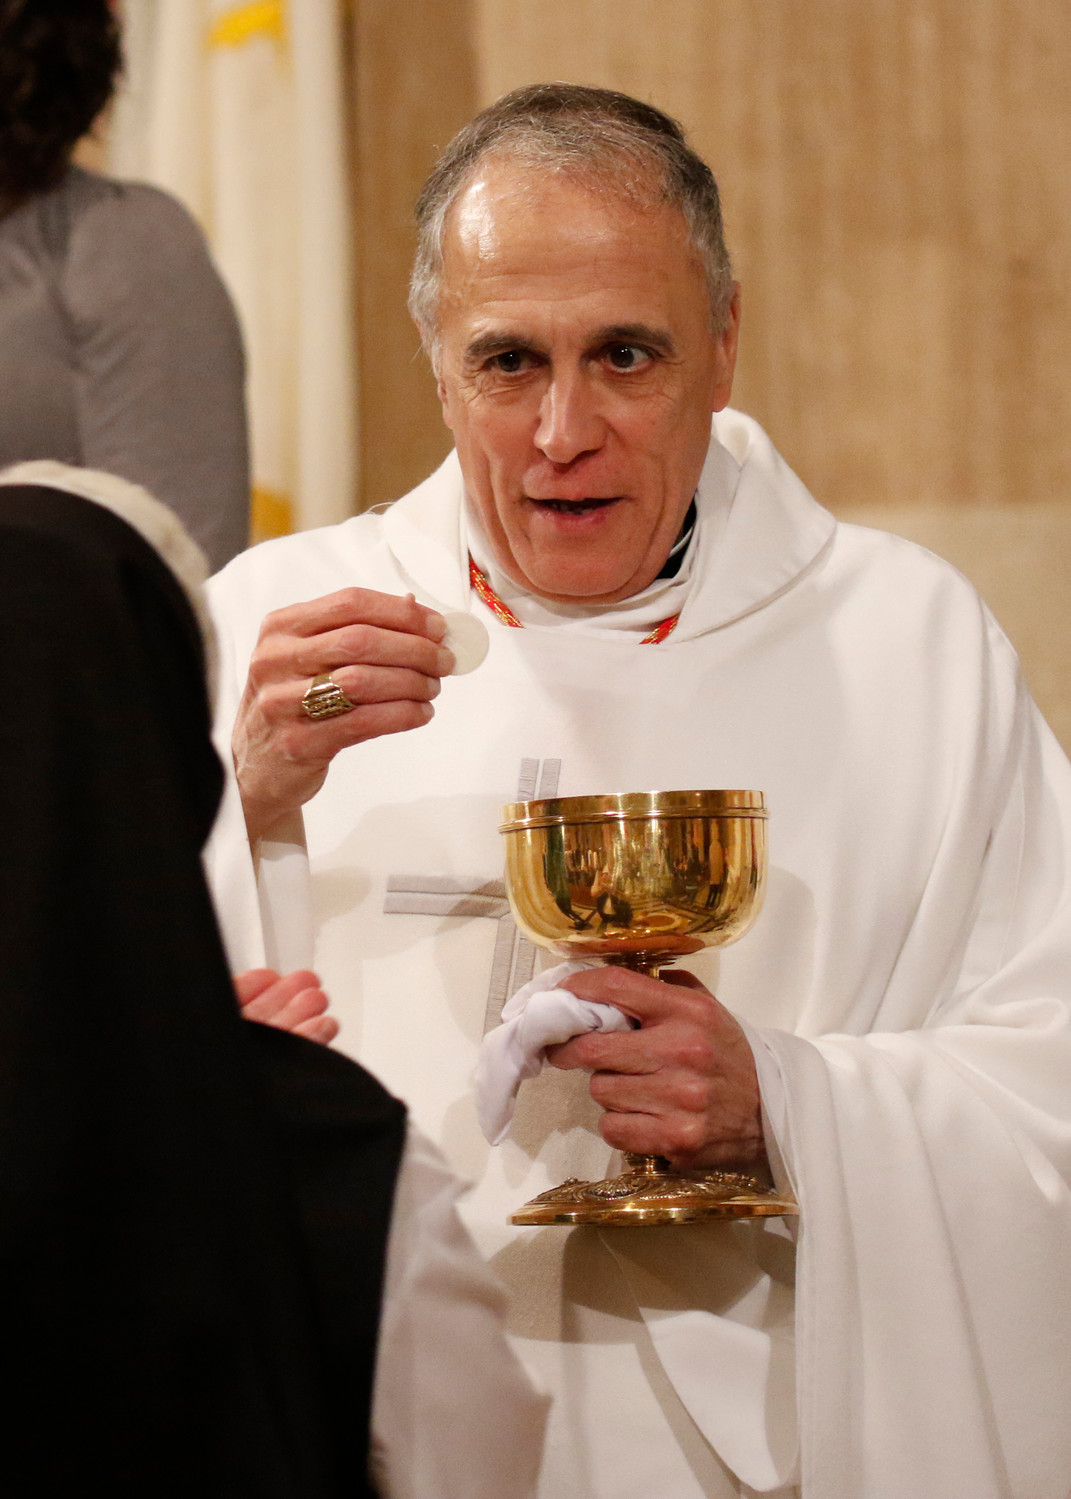 Cardinal Daniel N. DiNardo of Galveston-Houston, president of the U.S. Conference of Catholic Bishops, distributes Communion during the opening Mass of the National Prayer Vigil for Life Jan. 17 at the Basilica of the National Shrine of the Immaculate Conception in Washington.